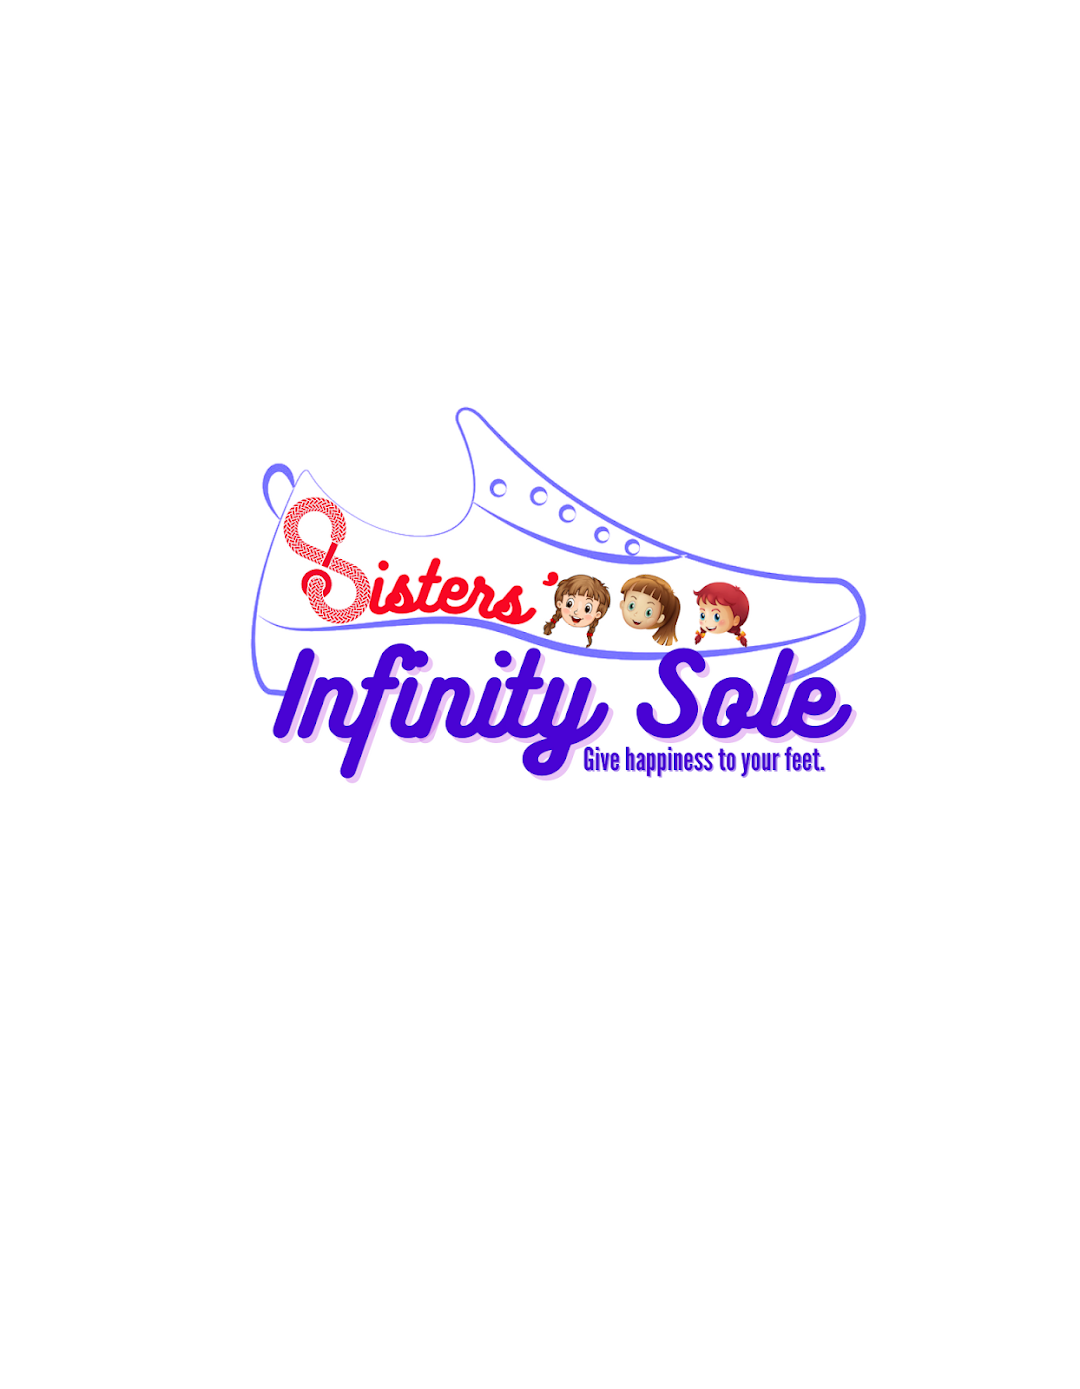 Sisters Infinity Sole